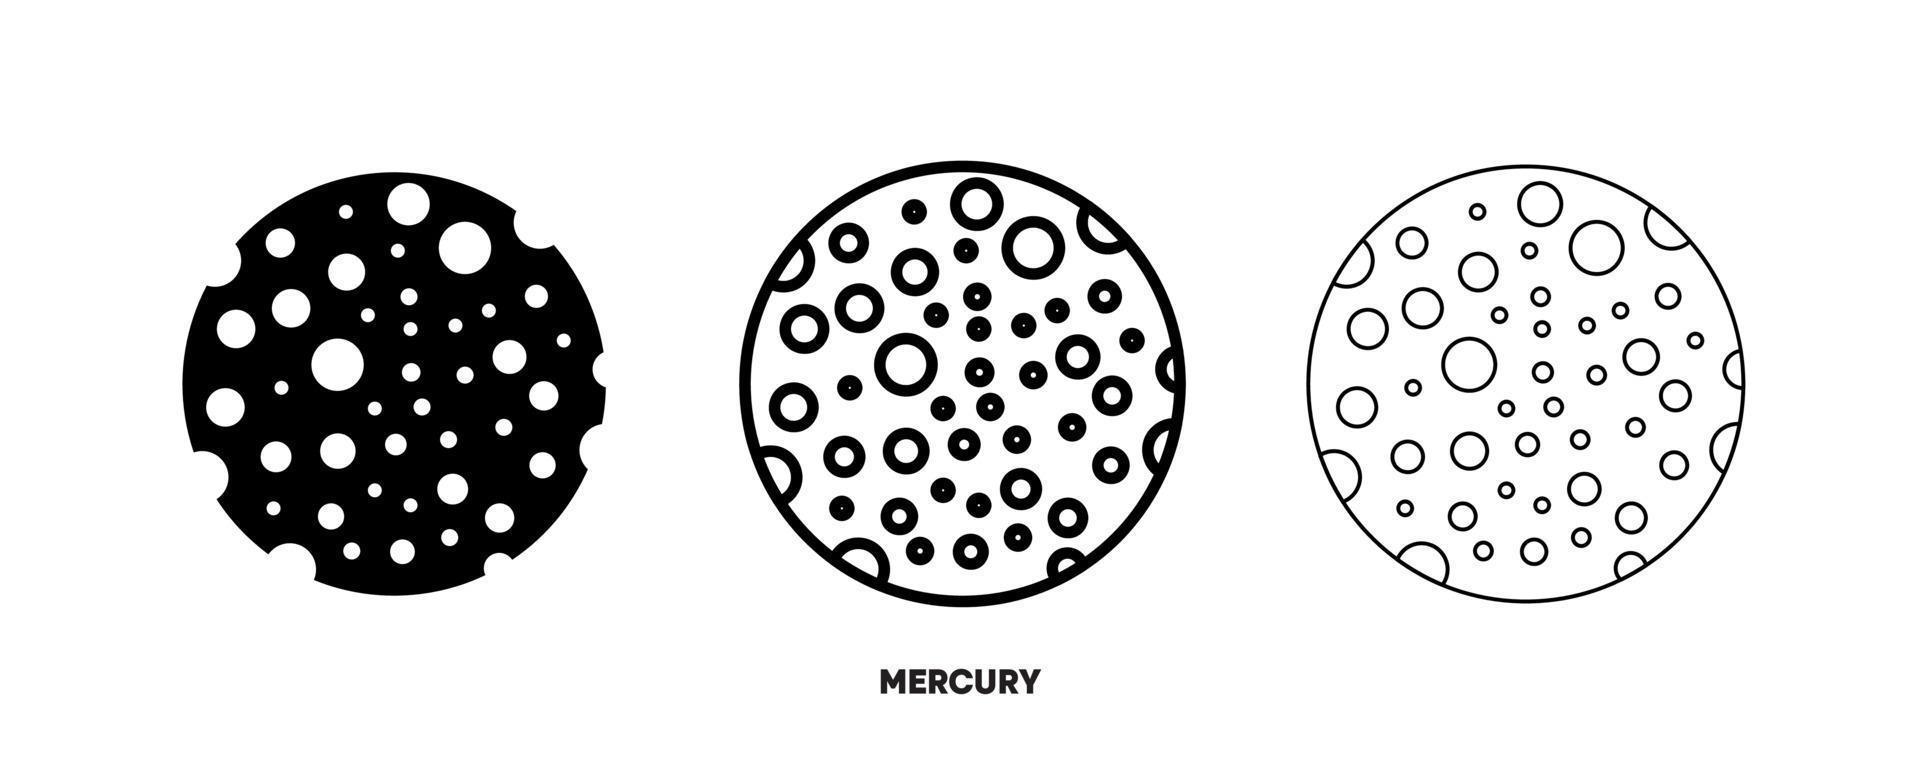 Mercury planet icon vector. Simple planet Mercury sign in modern design style and logo art for website and mobile app. Editable drawing and silhouette in one. vector